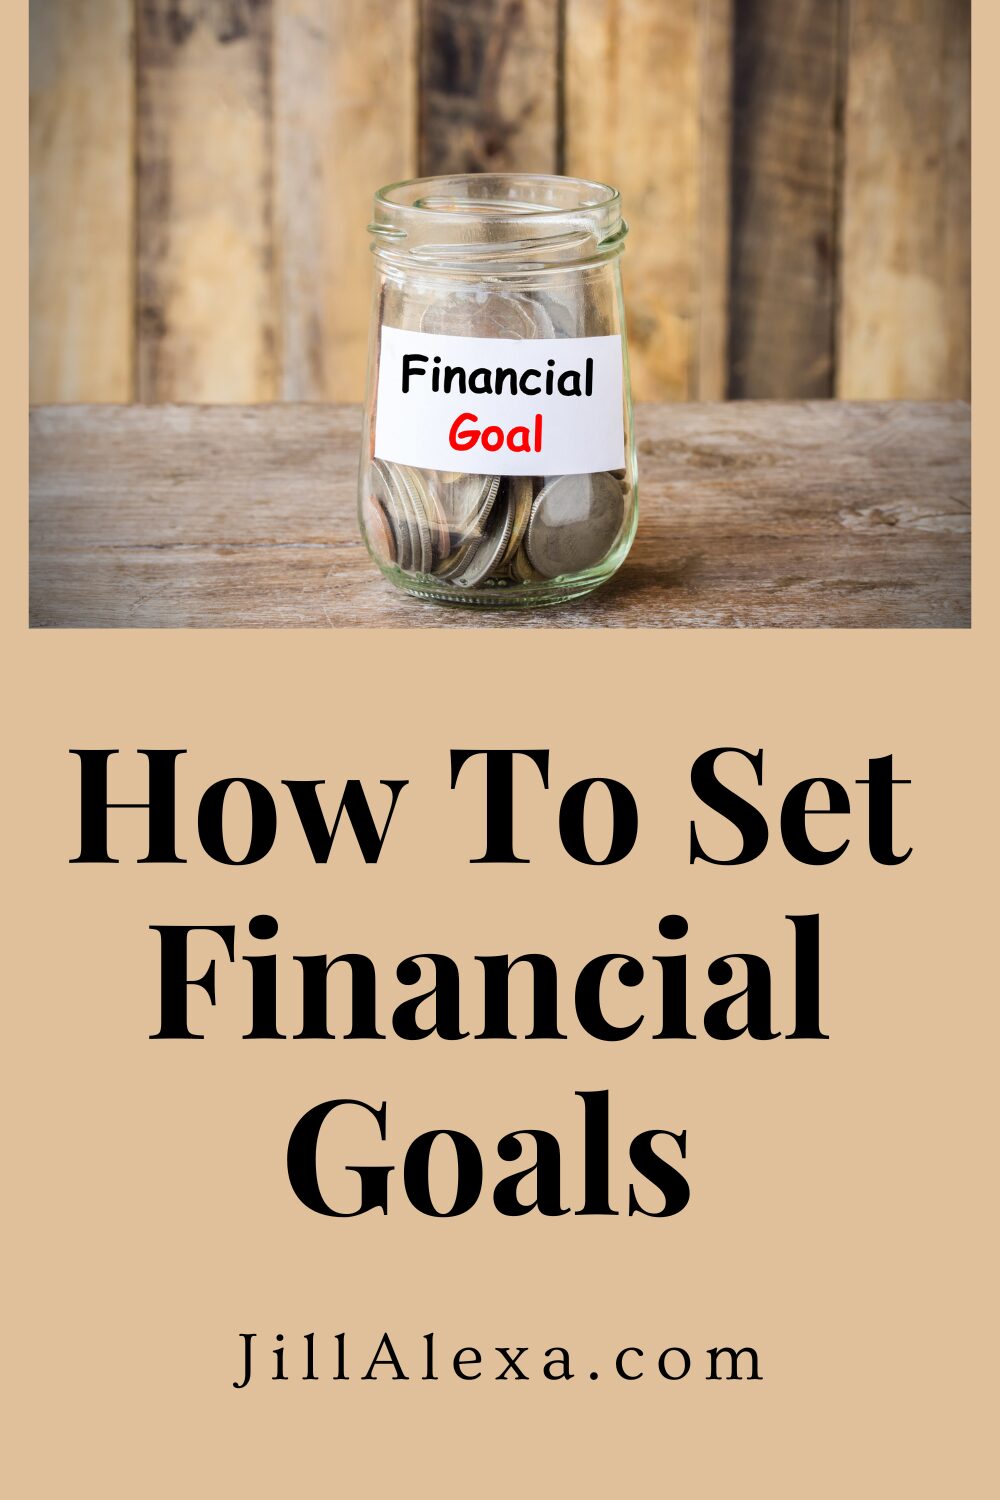 No matter where you are in life or how much money you make, it’s important to have financial goals to work towards. Here’s how to set financial goals.